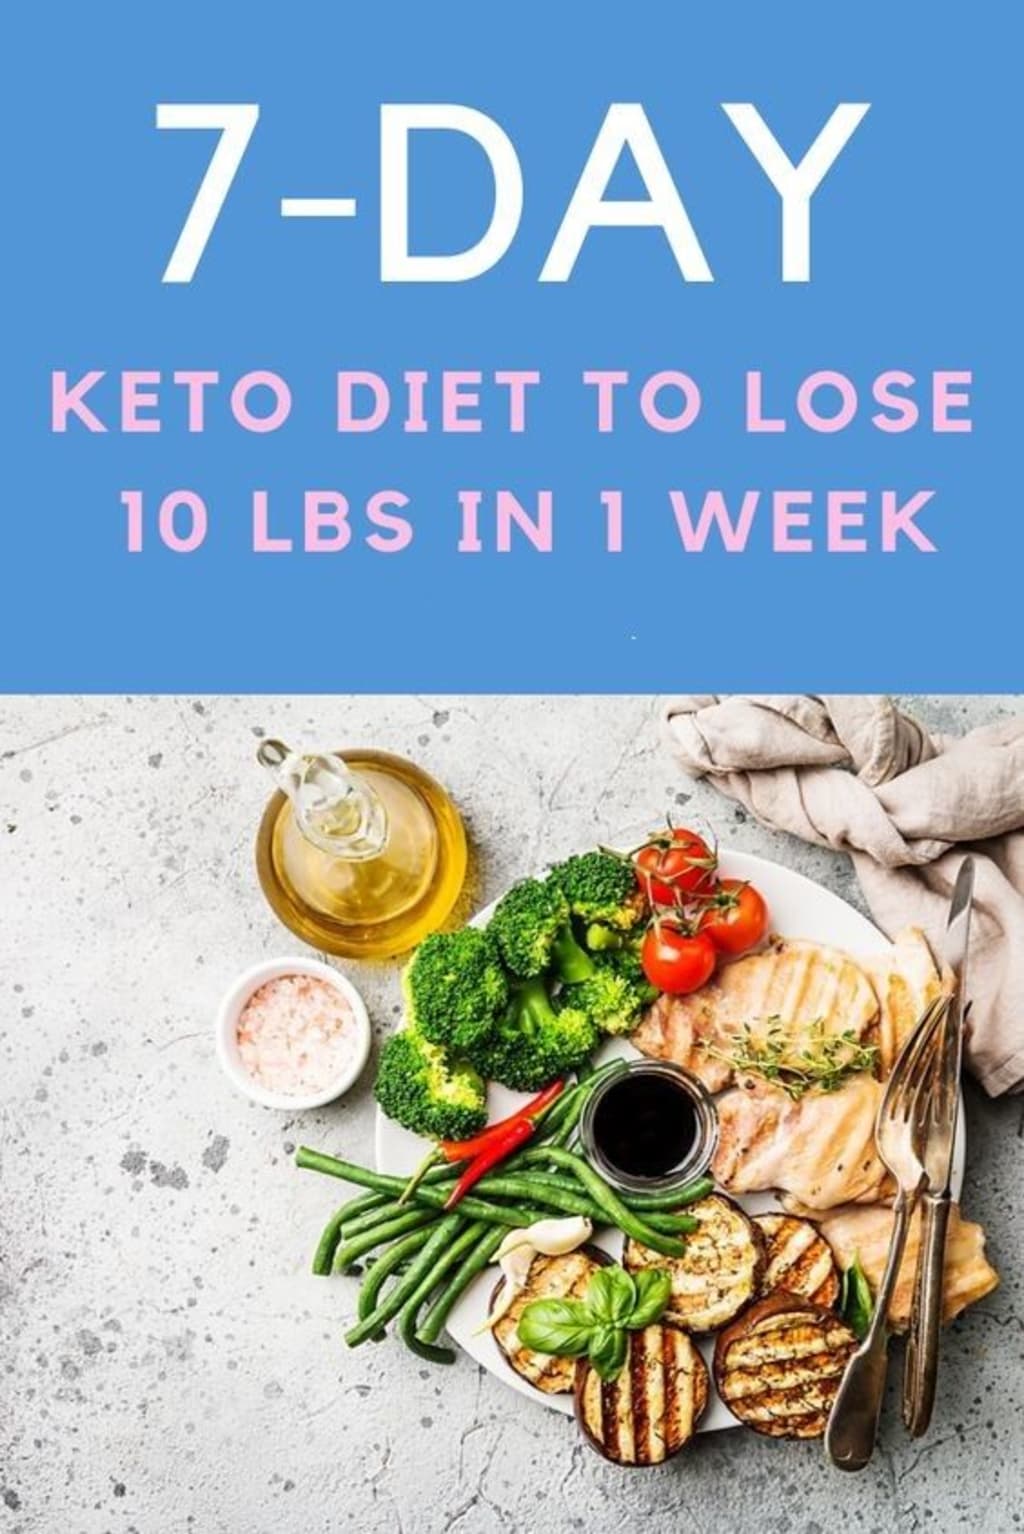 The 7-Day Keto Meal Plan for Weight Loss | Feast